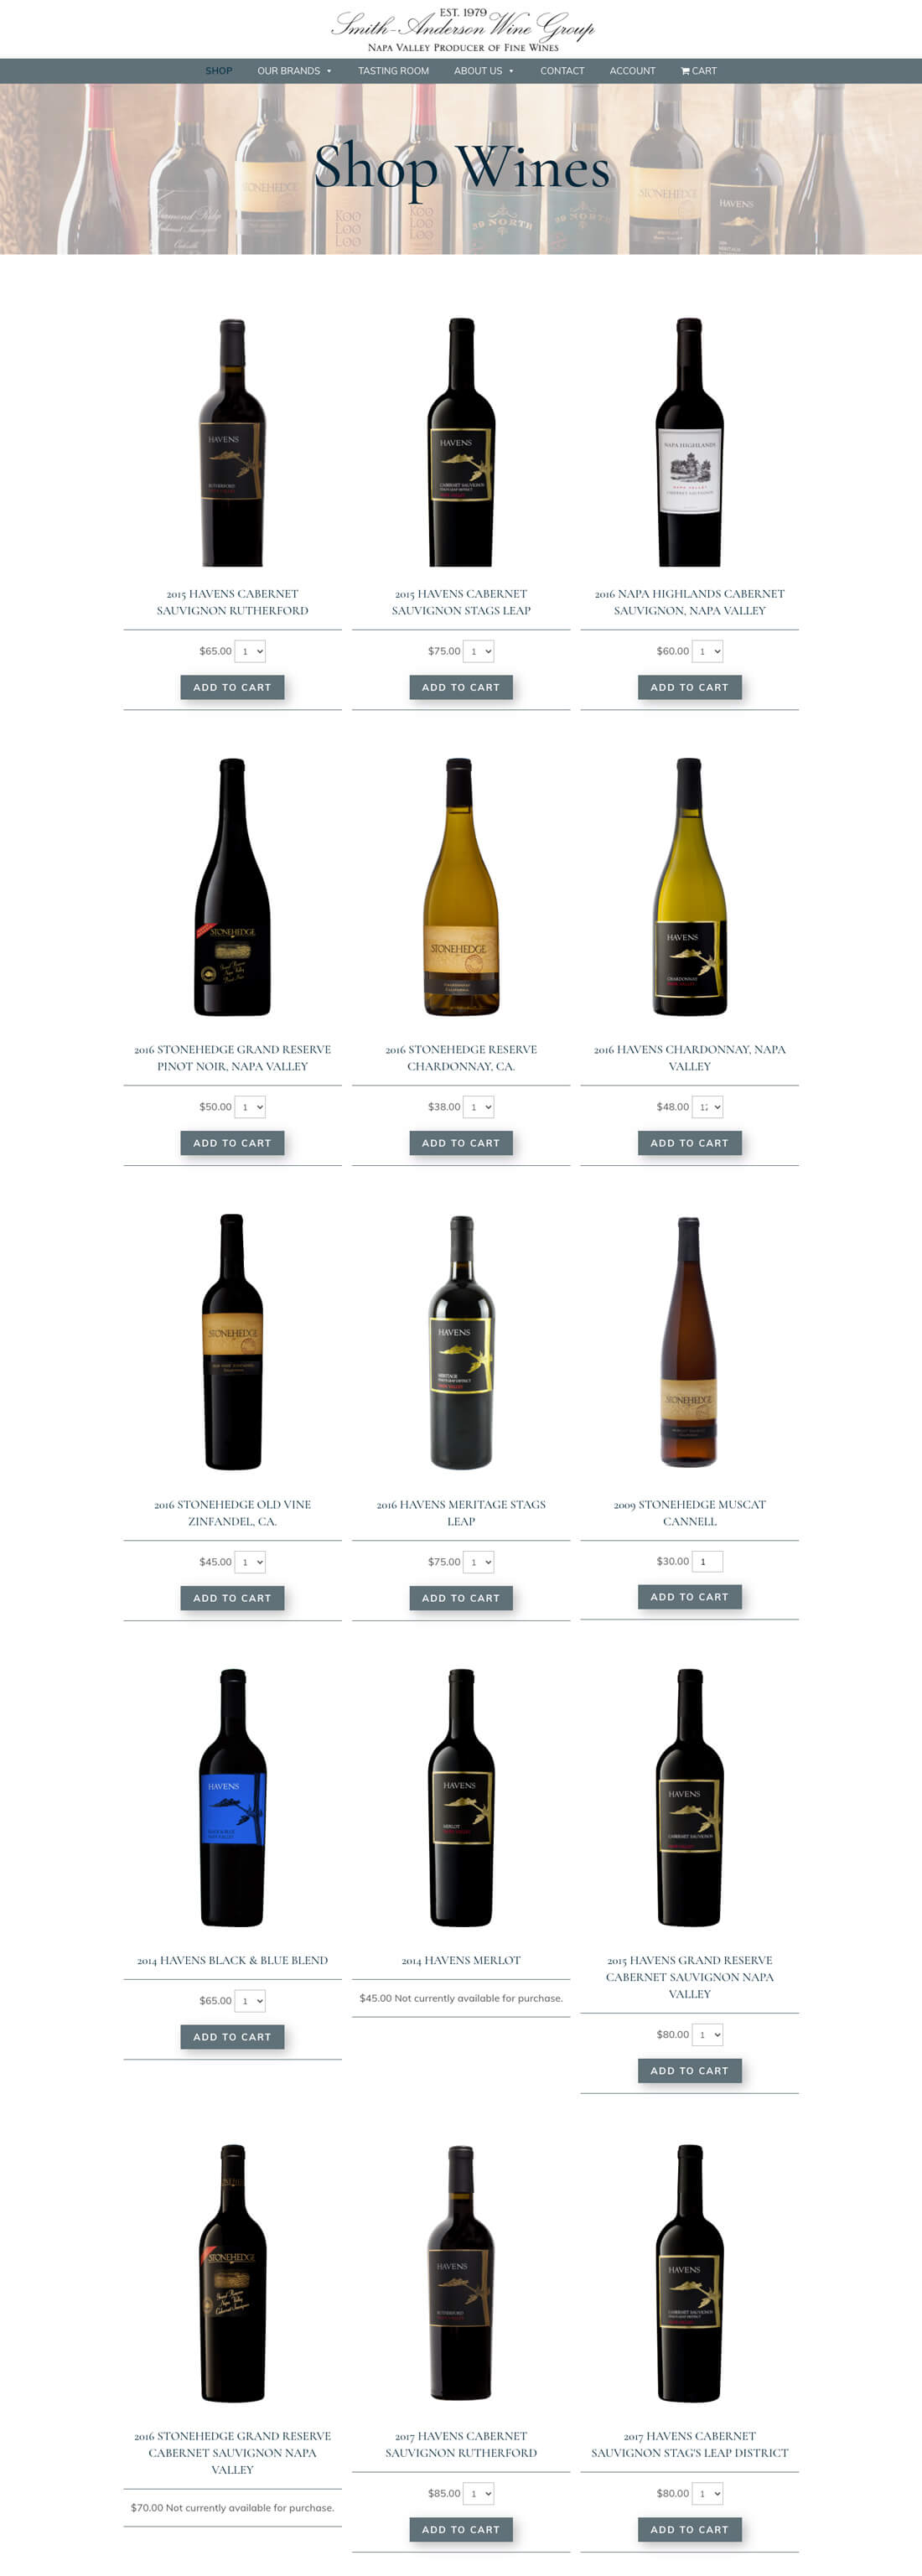 smith-anderson-winery-website-vinespring-shop-page